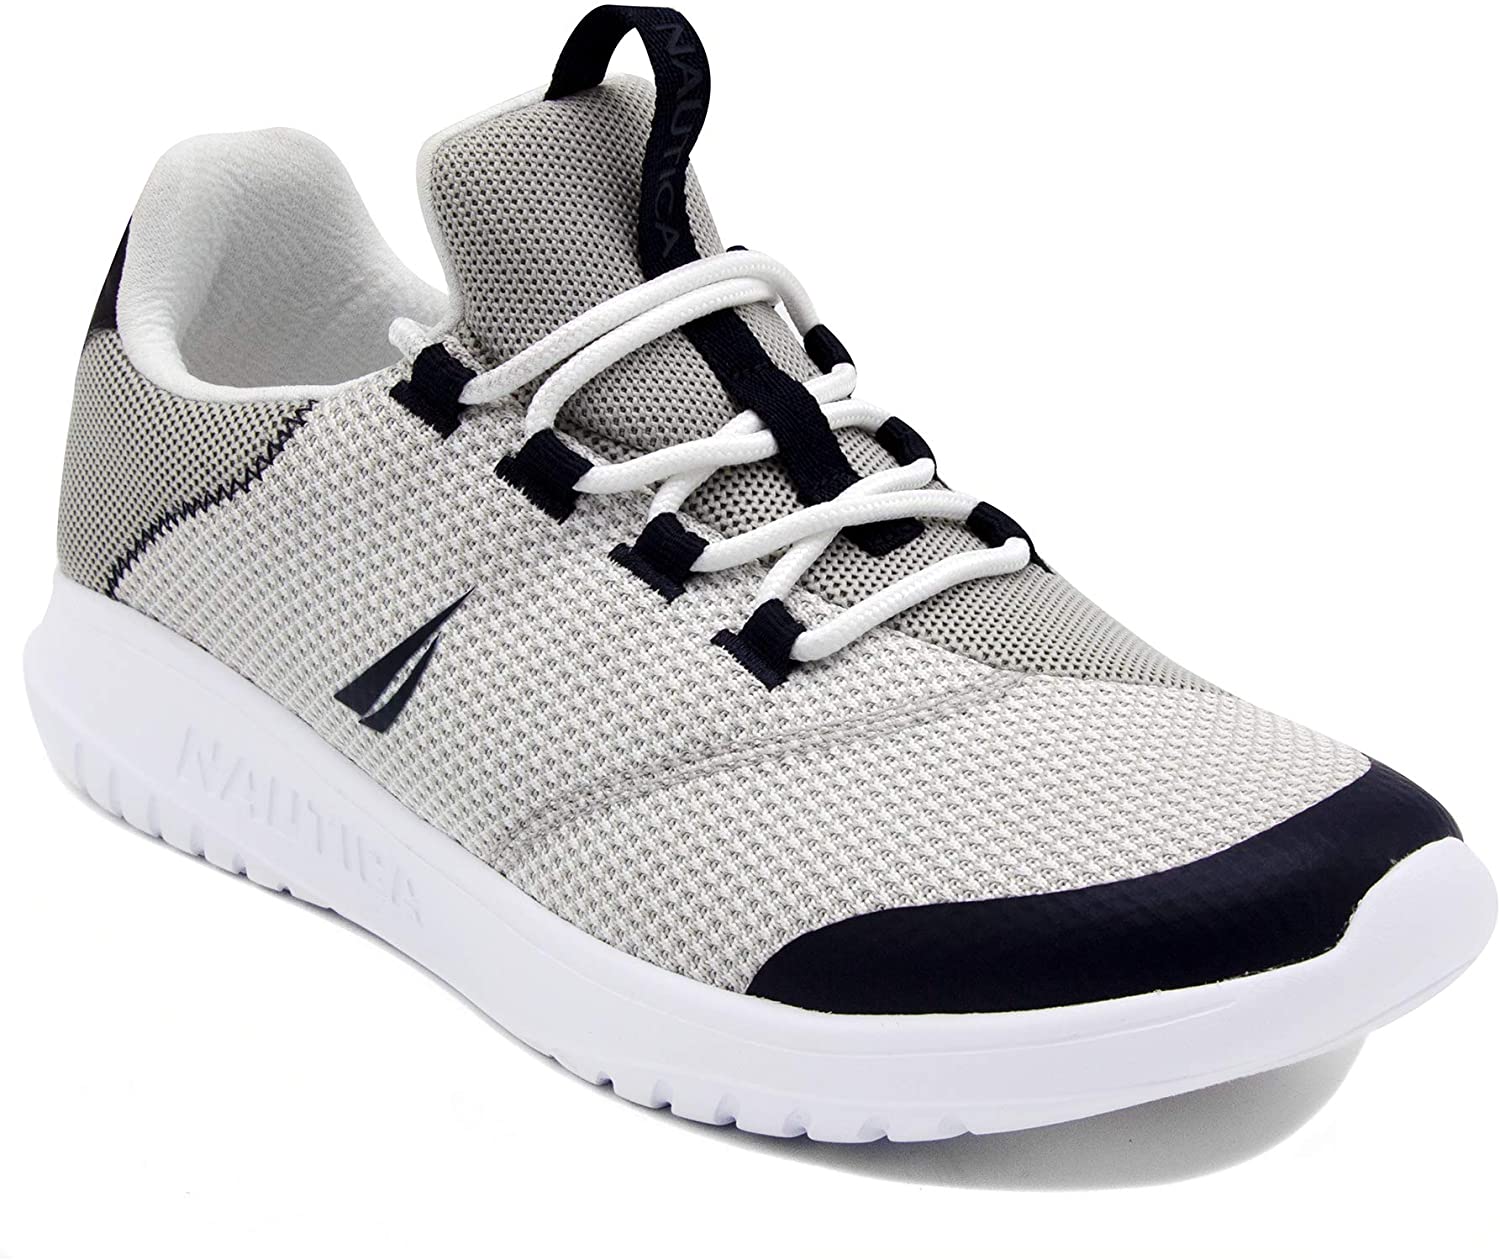 Nautica Men's Casual Lace-Up Fashion Sneakers Walking Shoes Lightweight Joggers